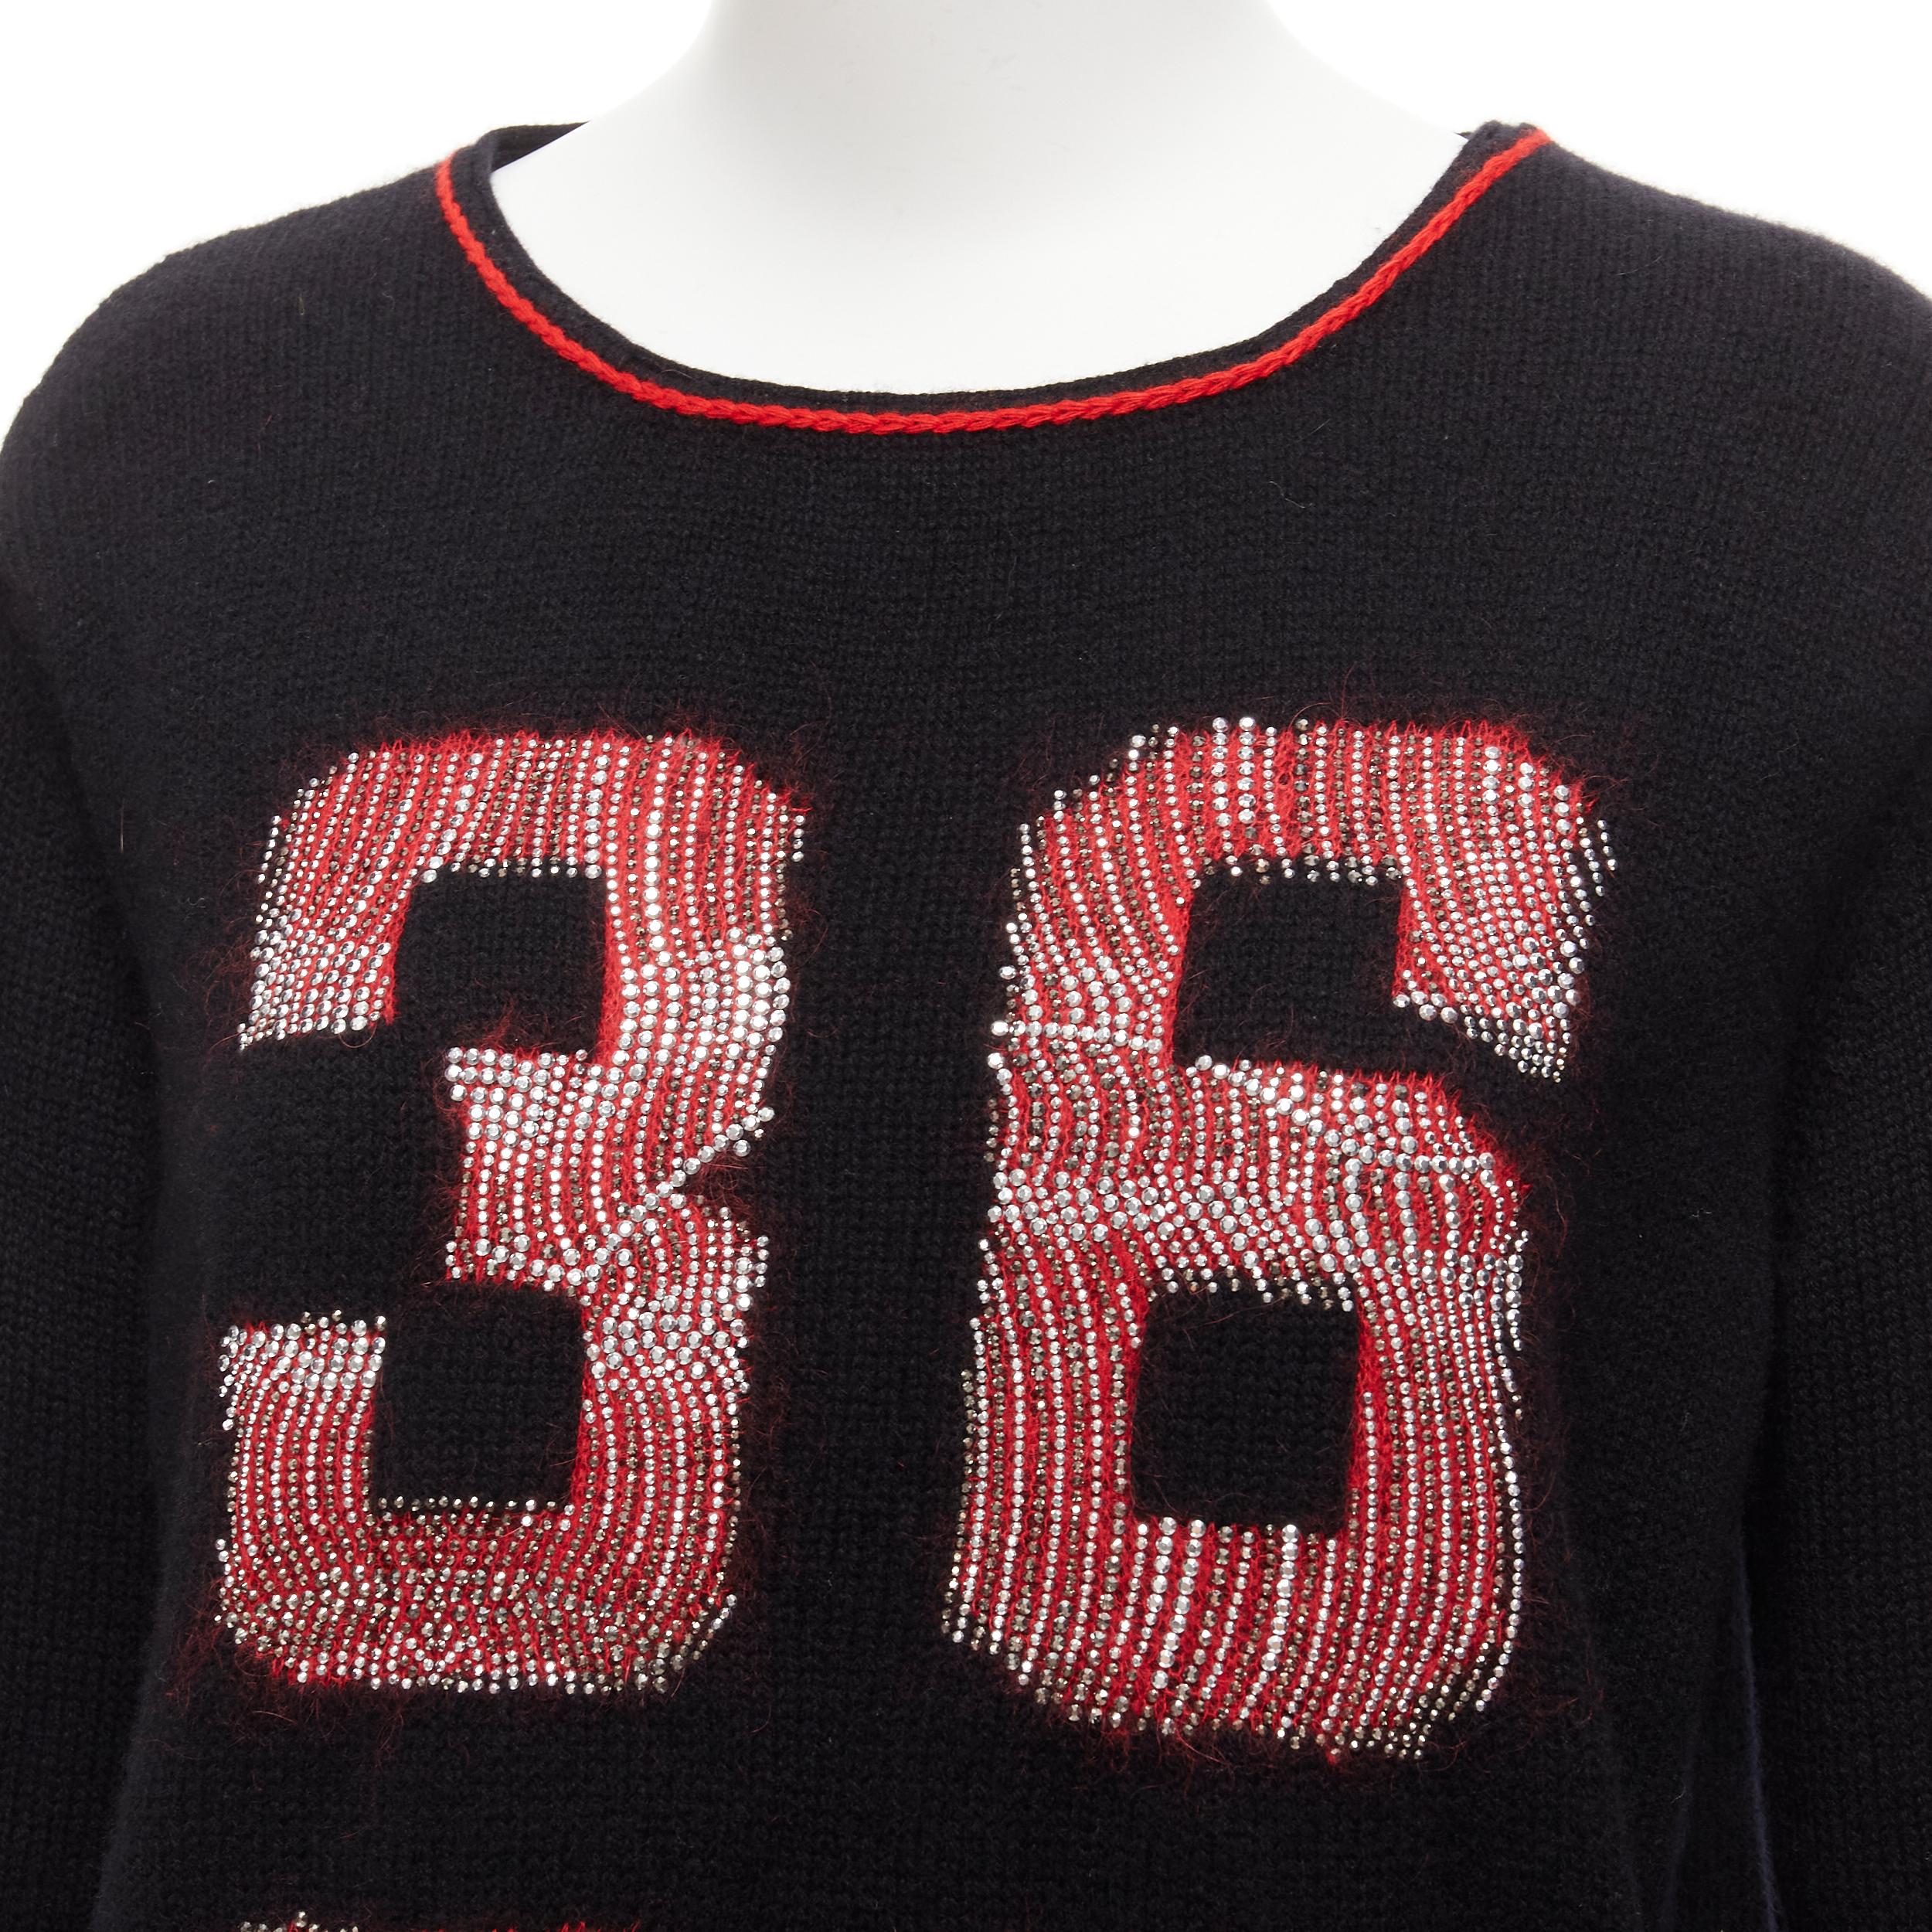 ERMANNO SCERVINO 100% cashmere mohair 3689 black red sweater IT40 S
Reference: AAWC/A01102
Brand: Ermanno Scervino
Material: Cashmere, Mohair, Blend
Color: Black, Red
Pattern: Solid
Closure: Pullover
Extra Details: Crystal covered mohair blend